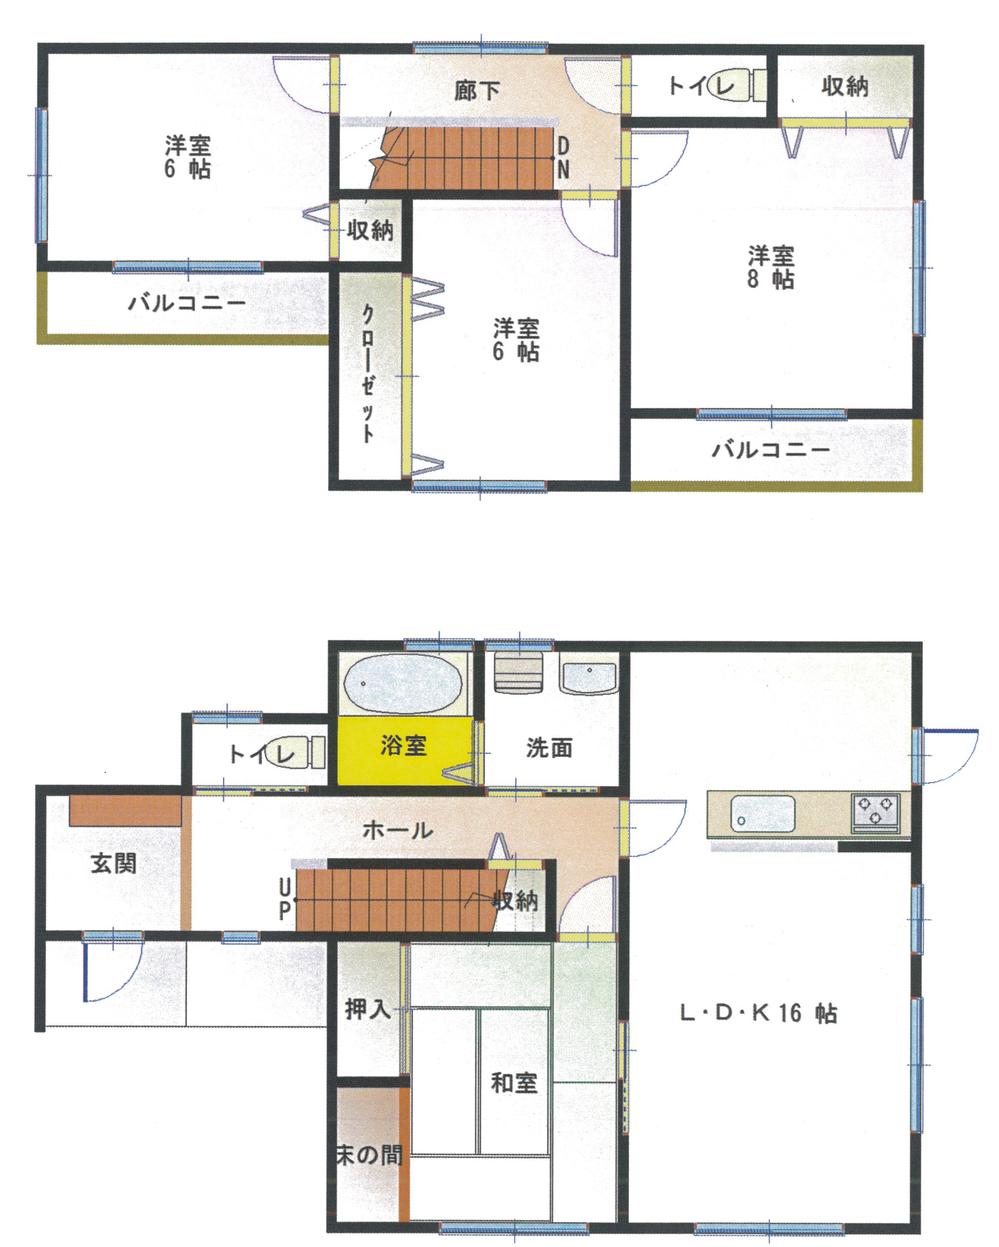 Floor plan. 23.8 million yen, 4LDK, Land area 164.62 sq m , If the building area 107.64 sq m present situation and the drawing is different, we will give priority to the current state. 